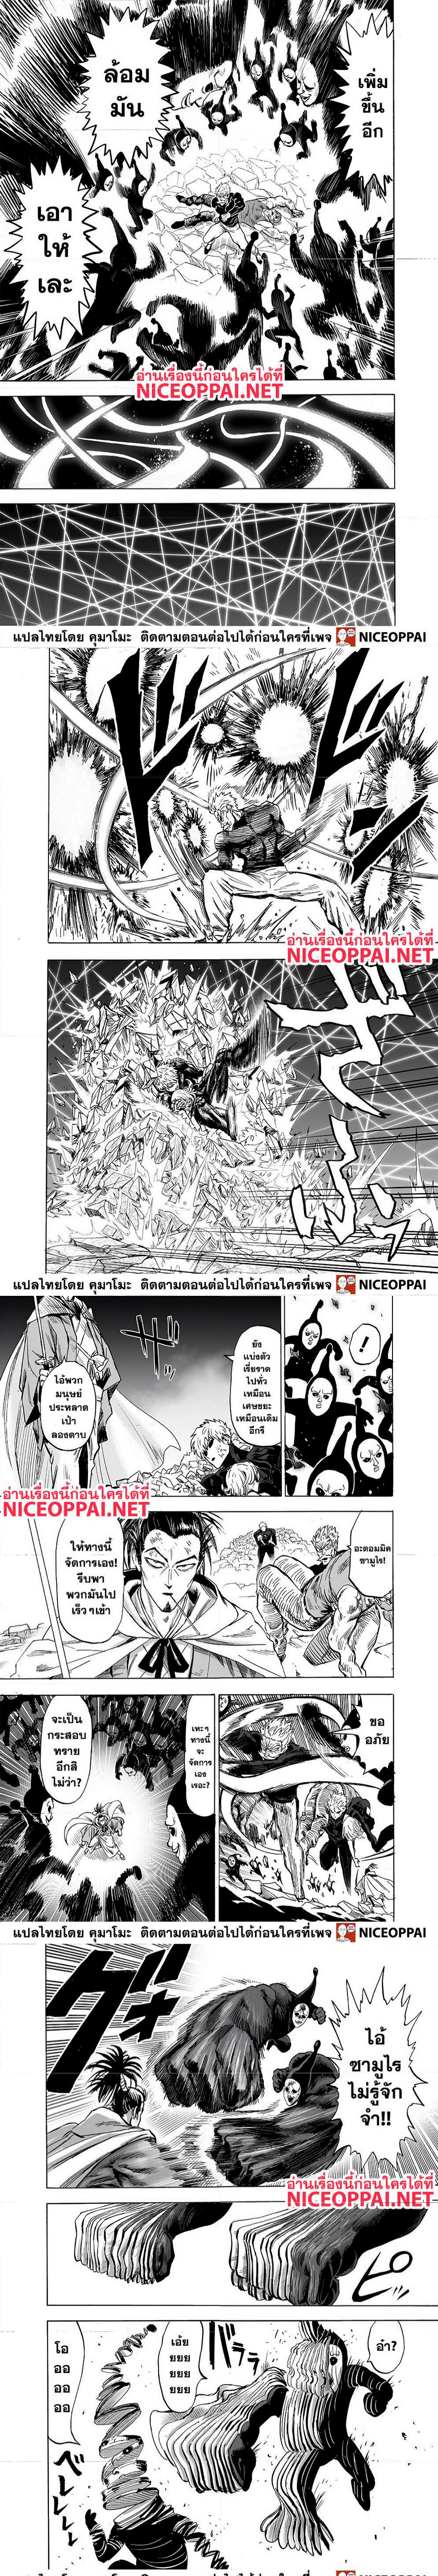 One Punch Man145 (5)